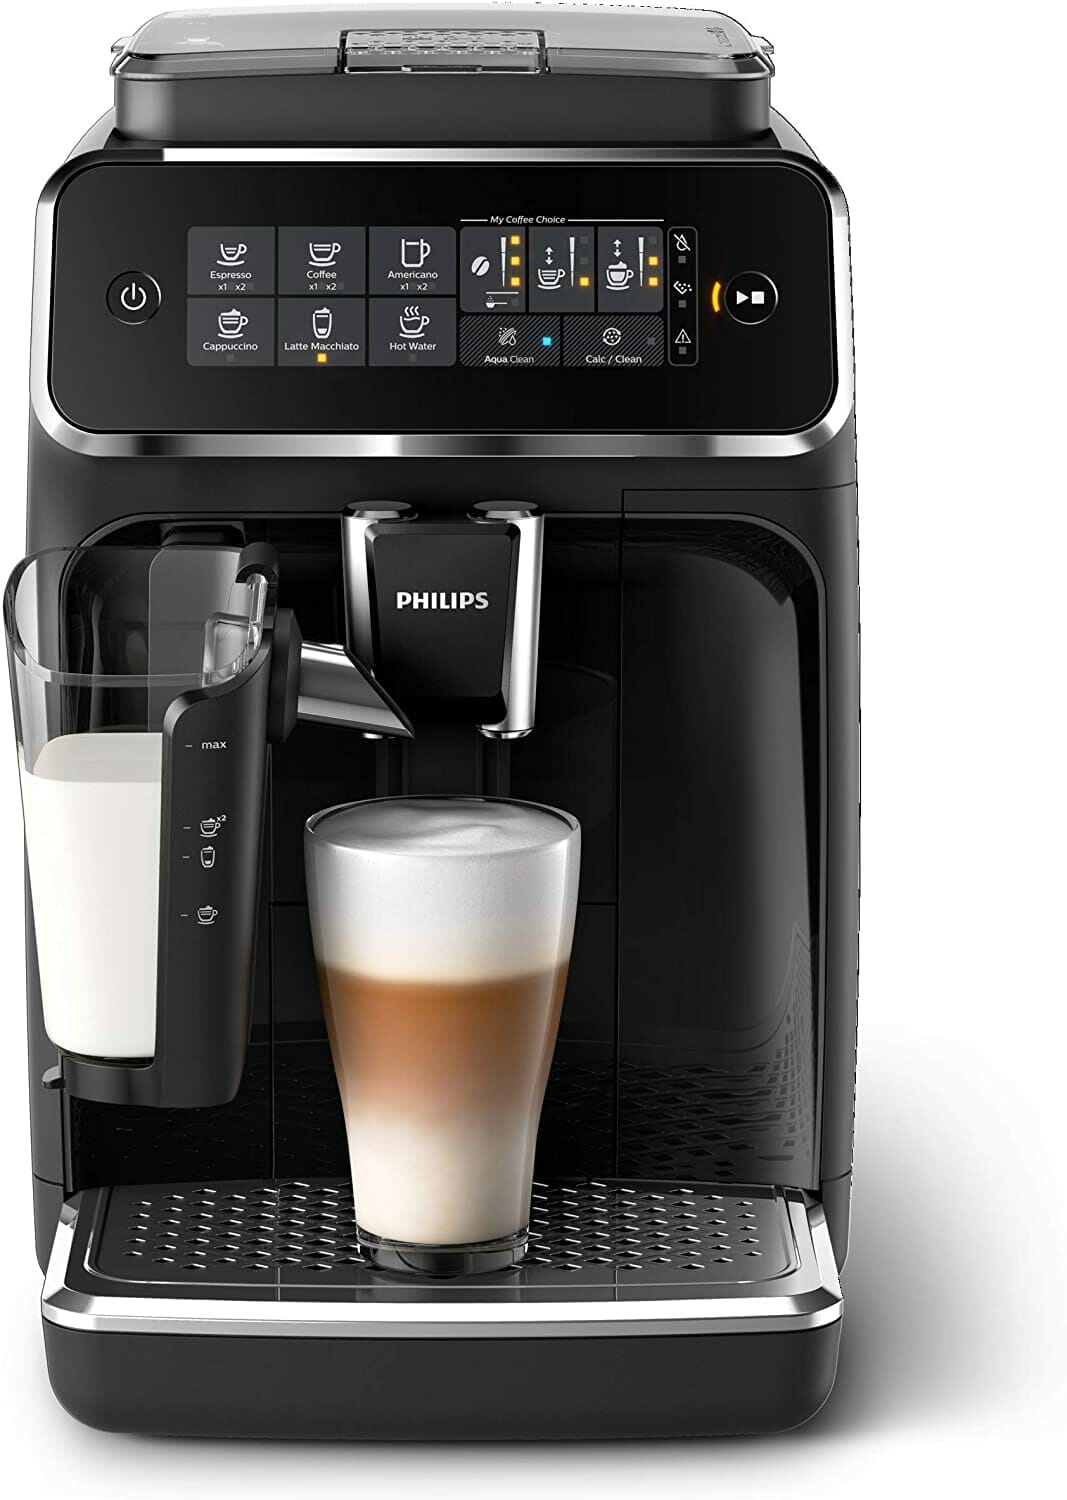 Philips 3200 Series Fully Automatic Espresso Machine EP324154 Review